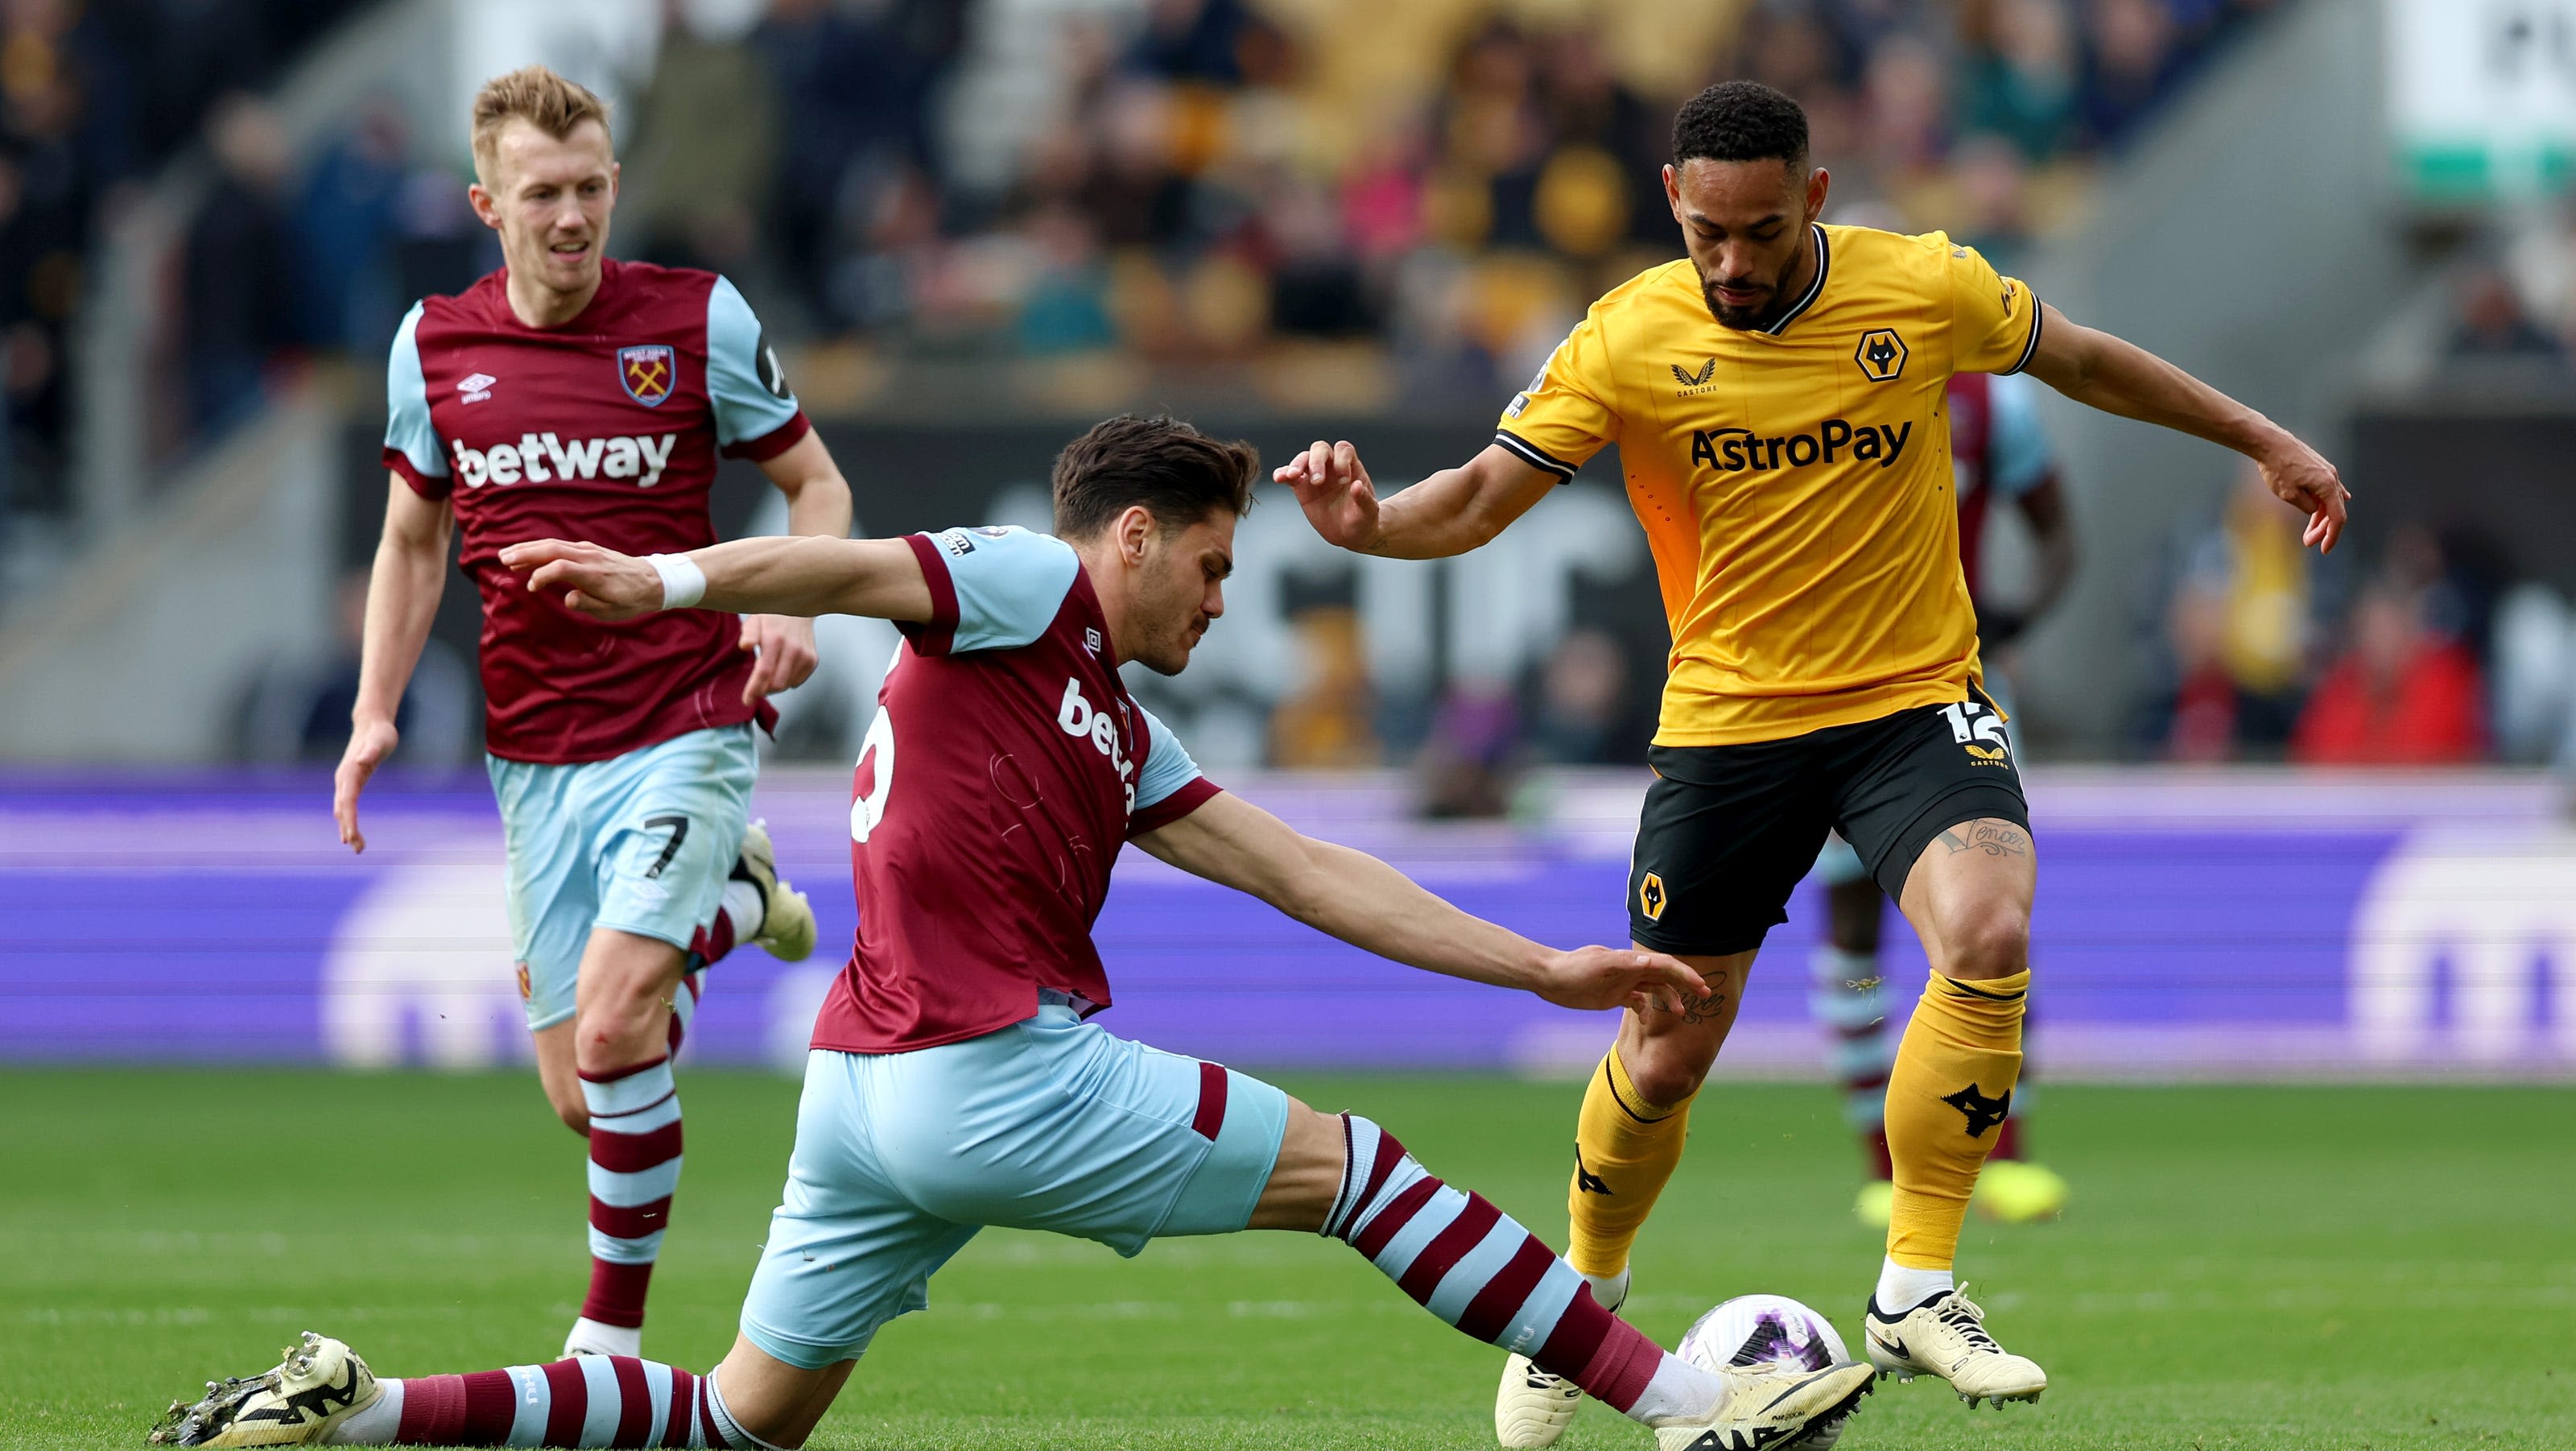 Premier League in Jacksonville: West Ham, Wolves ready to kick off Stateside Cup soccer